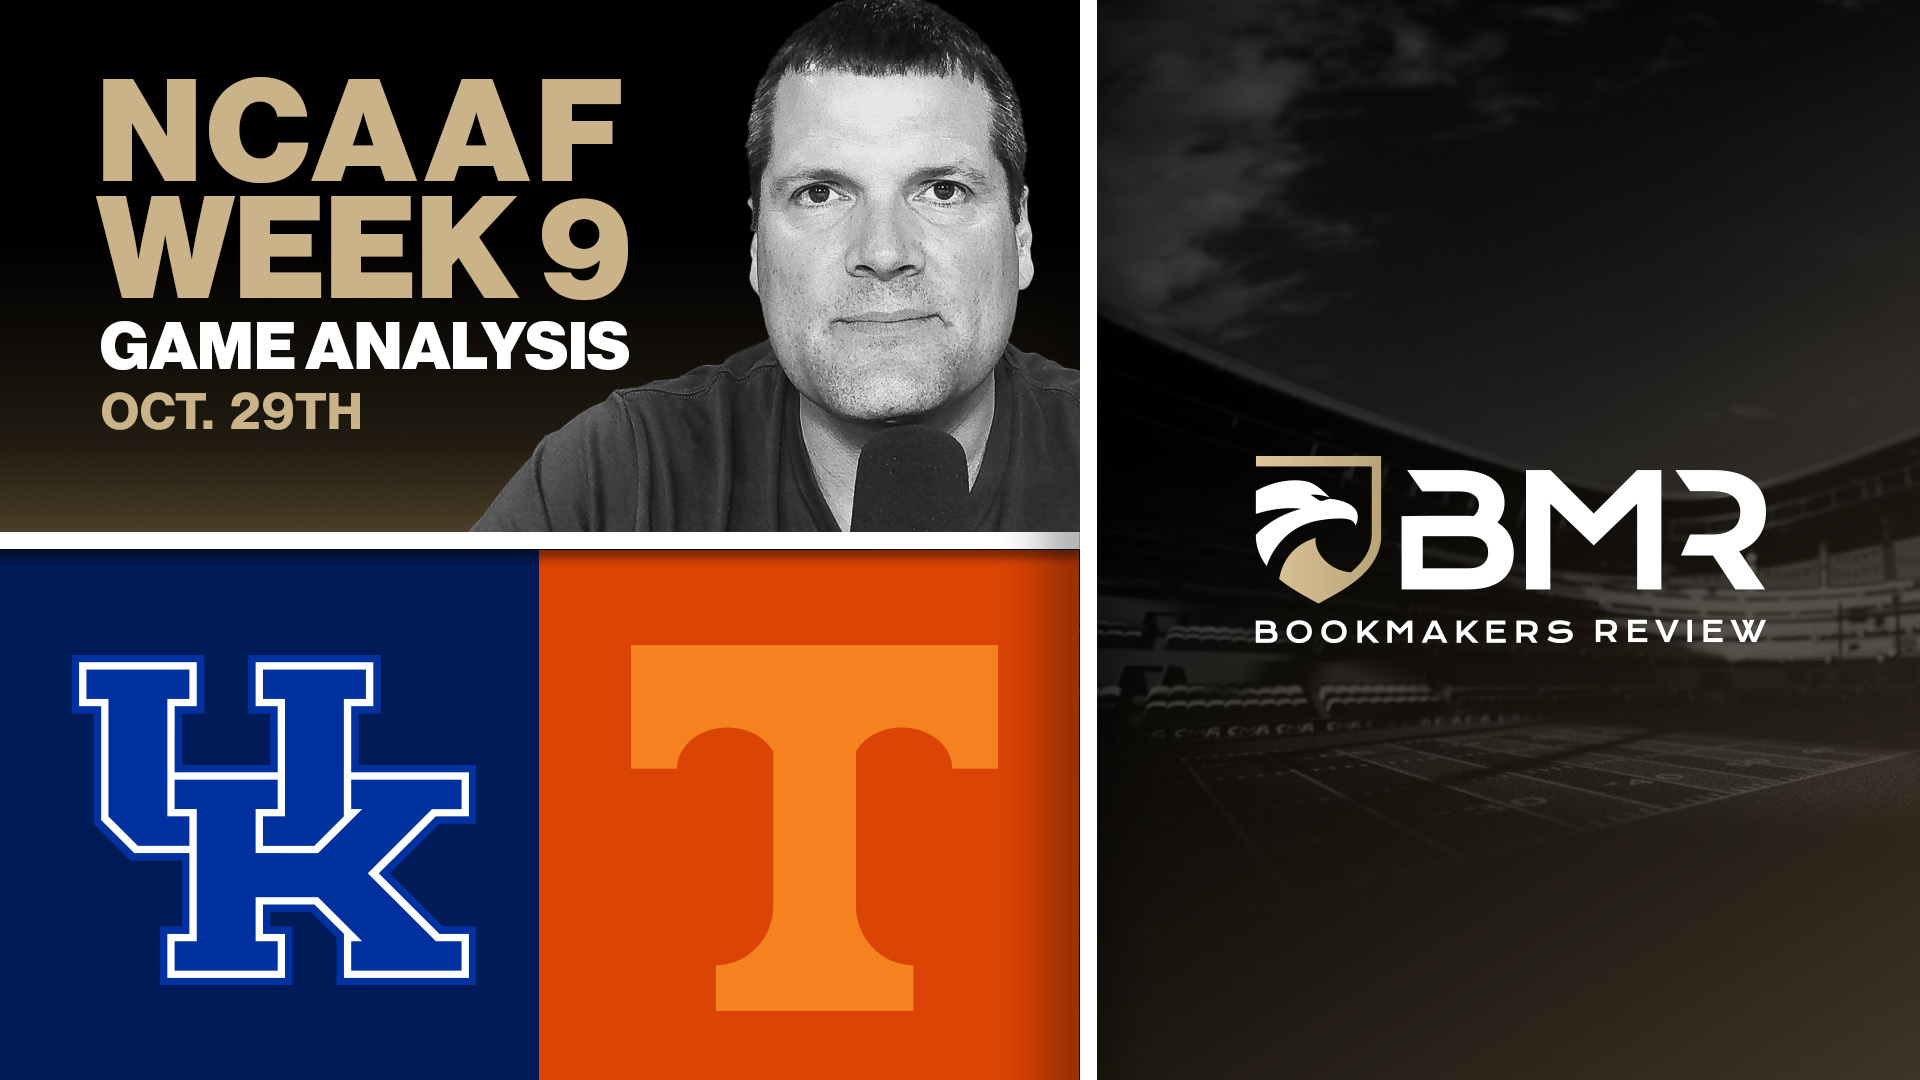 Kentucky vs. Tennessee &#8211; NCAAF Week 9 Pick by Donnie RightSide (Oct. 29th)